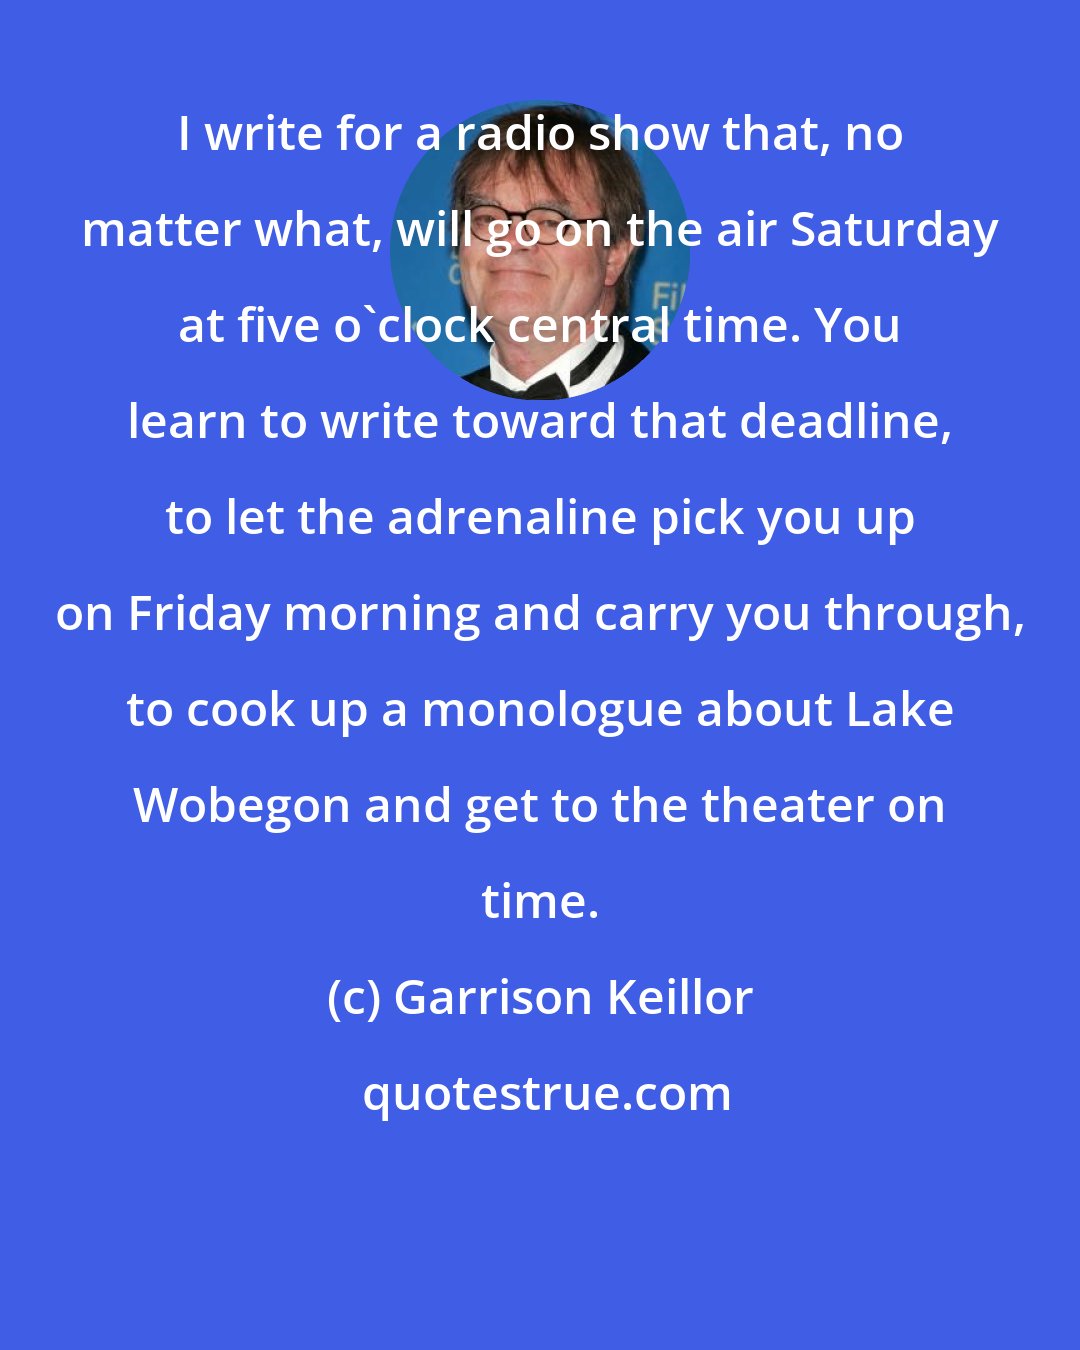 Garrison Keillor: I write for a radio show that, no matter what, will go on the air Saturday at five o'clock central time. You learn to write toward that deadline, to let the adrenaline pick you up on Friday morning and carry you through, to cook up a monologue about Lake Wobegon and get to the theater on time.